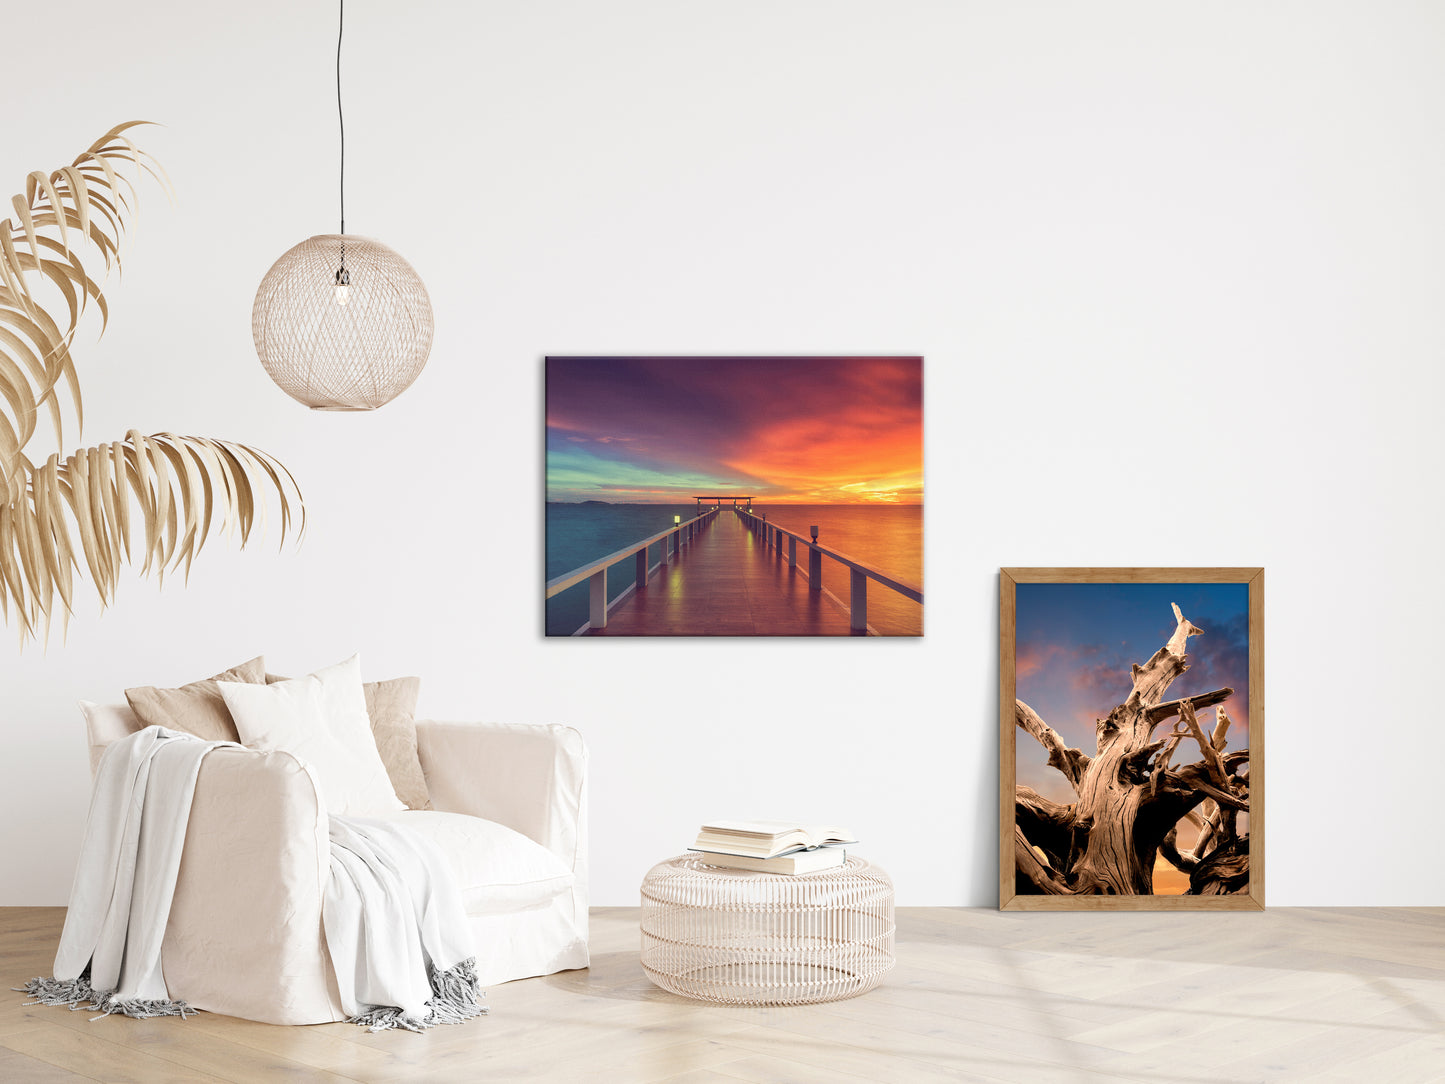 Horizontal Wall Decor For Living Room: Surreal Wooden Pier At Sunset with Intrigued Effect Landscape Photo Canvas Wall Art Prints